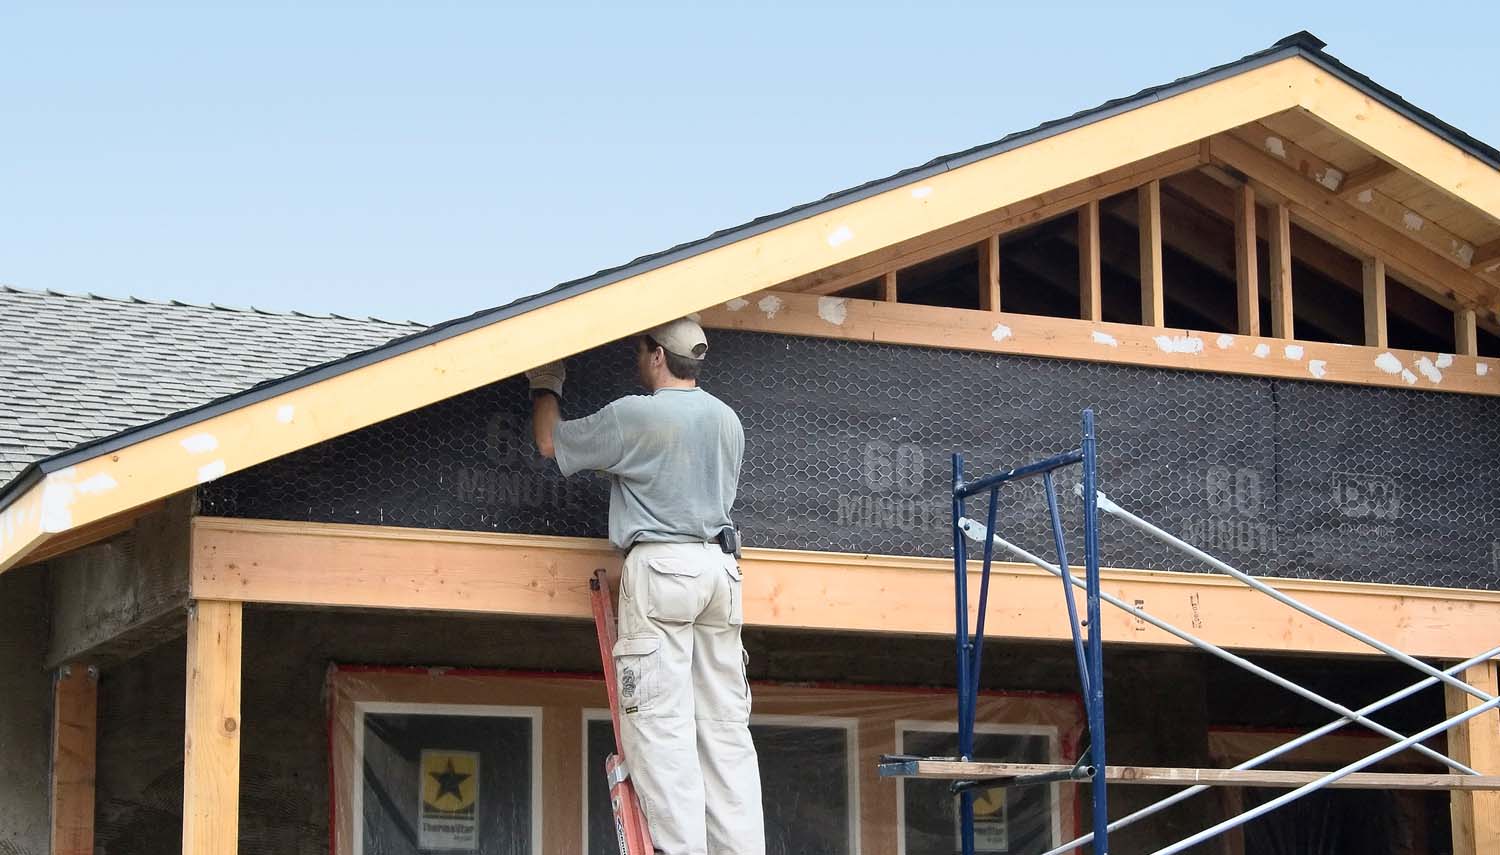 A craftsman installing siding at the exterior of the house.